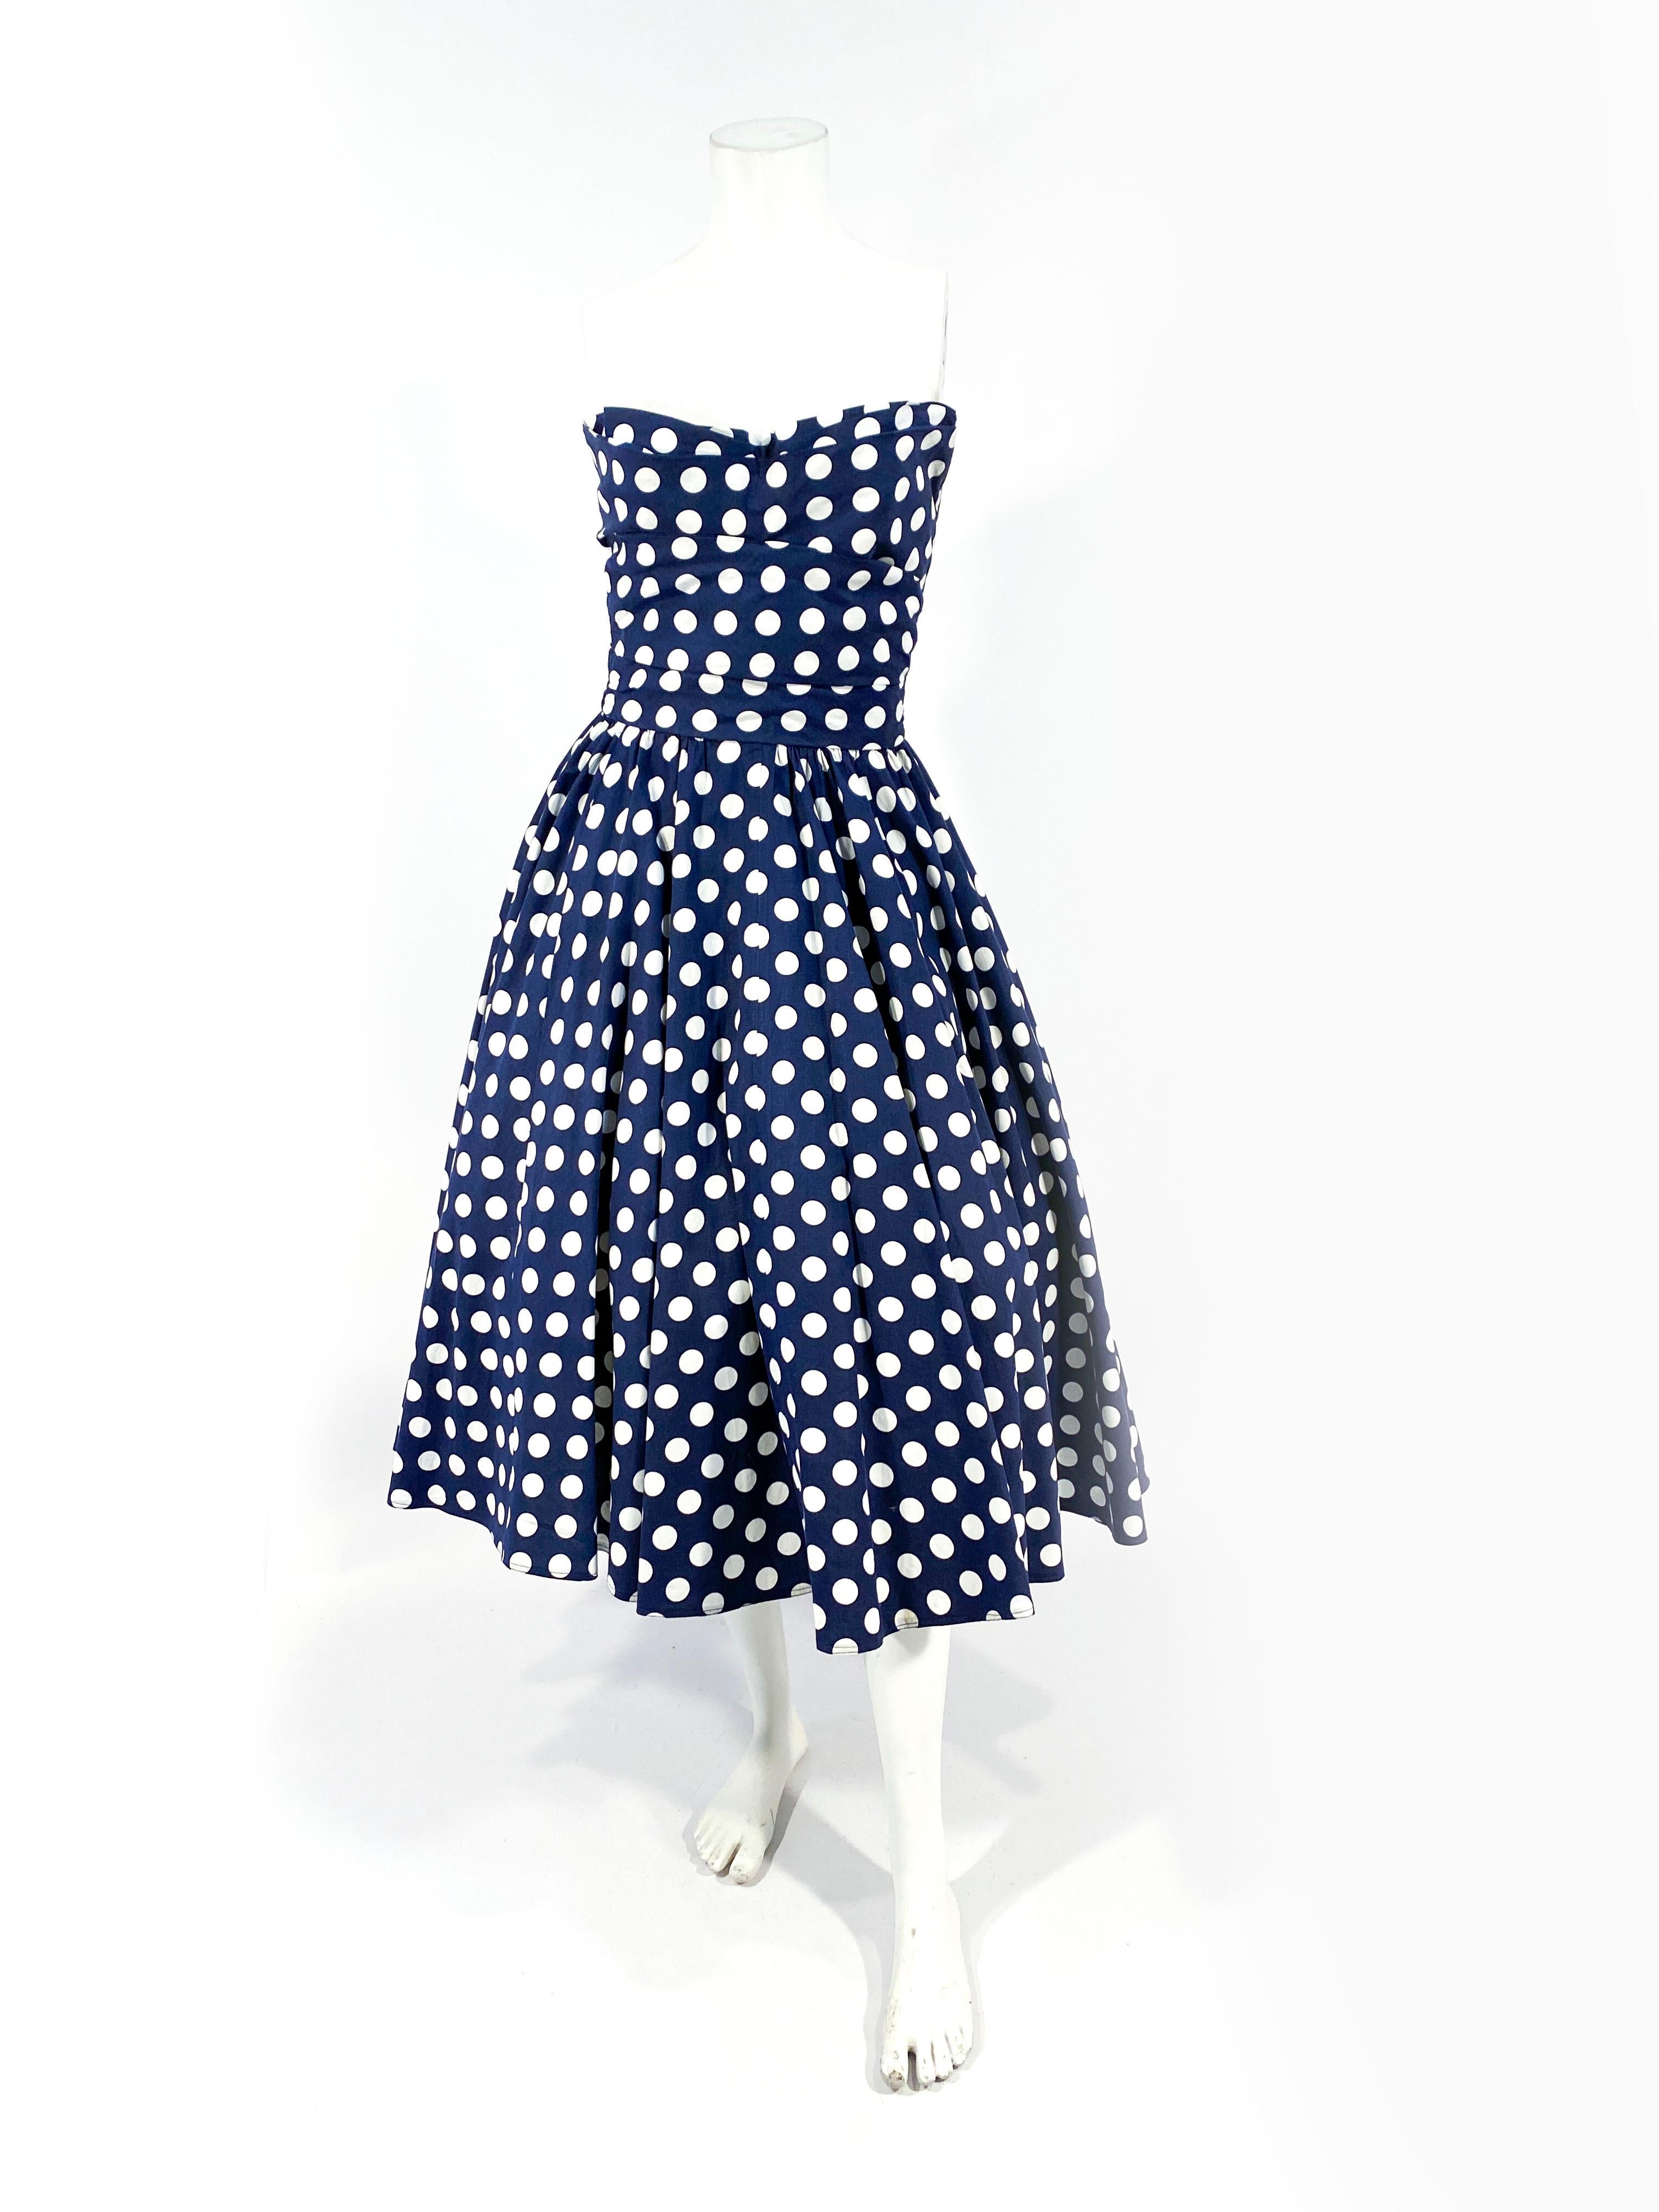 Women's 1950s Navy and White Polkadot Summer Party Dress